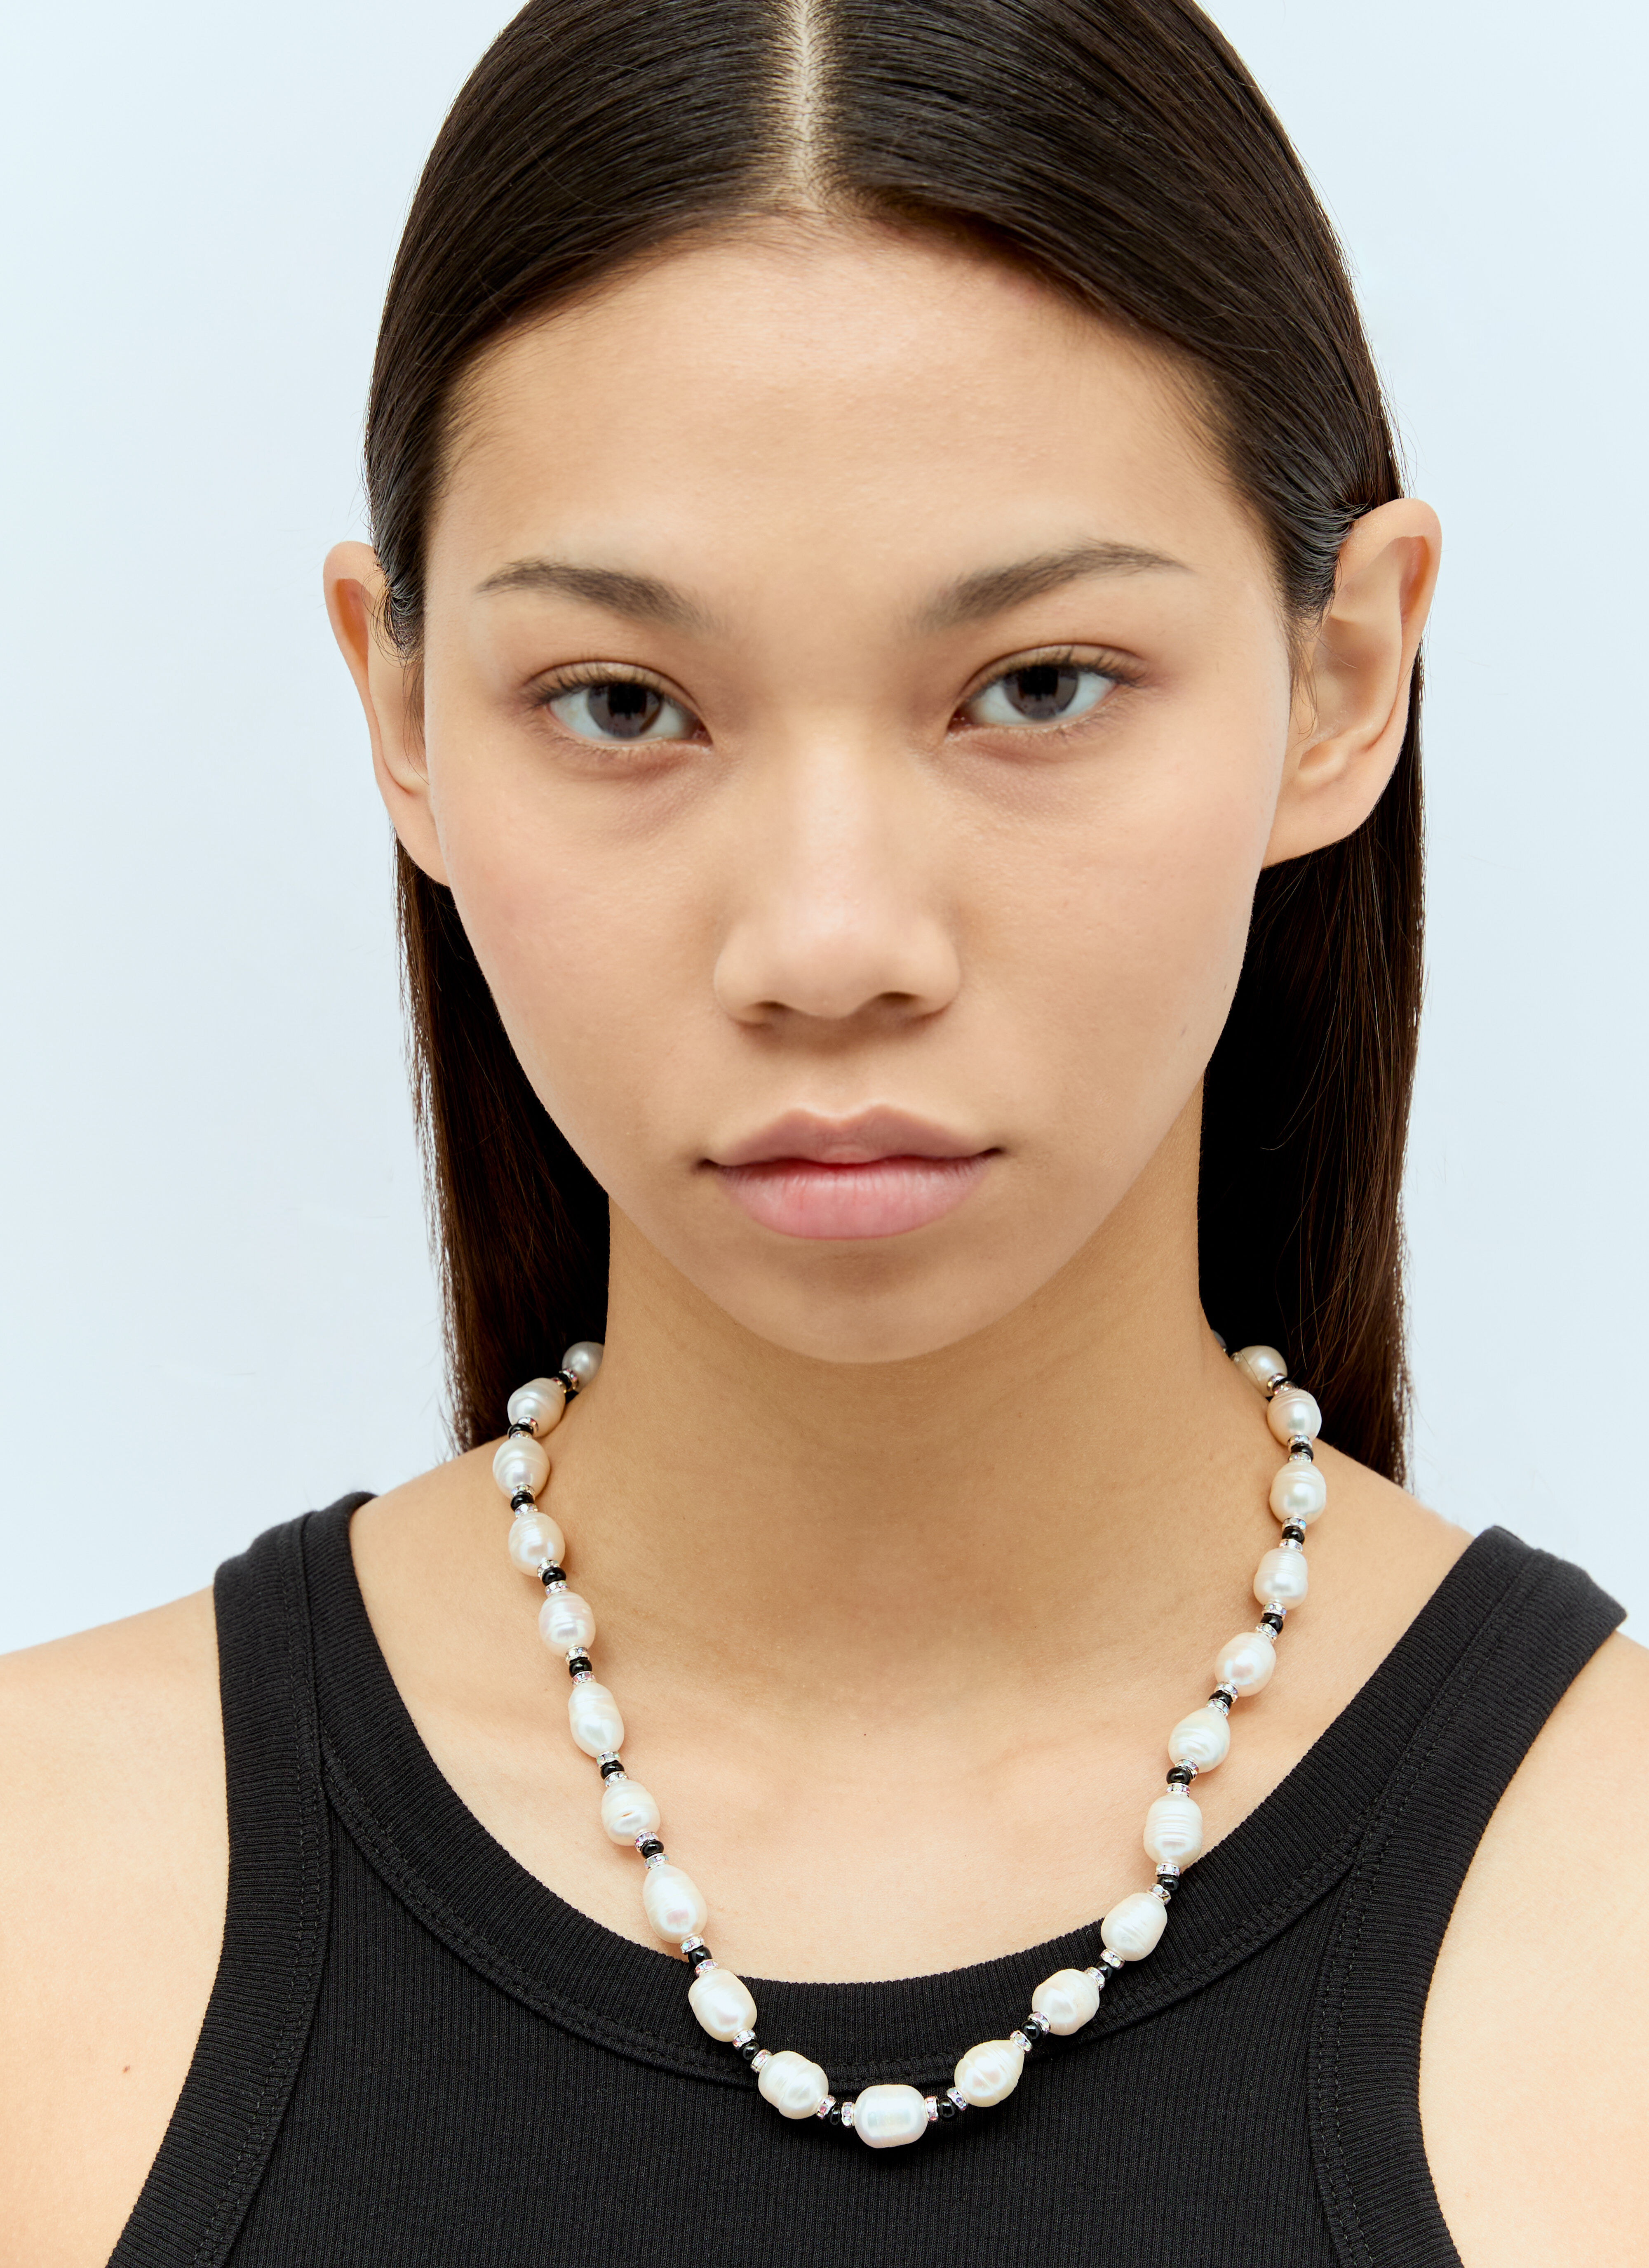 Pearl Octopuss.y Tous Les Jours ネックレス シルバー prl0355002